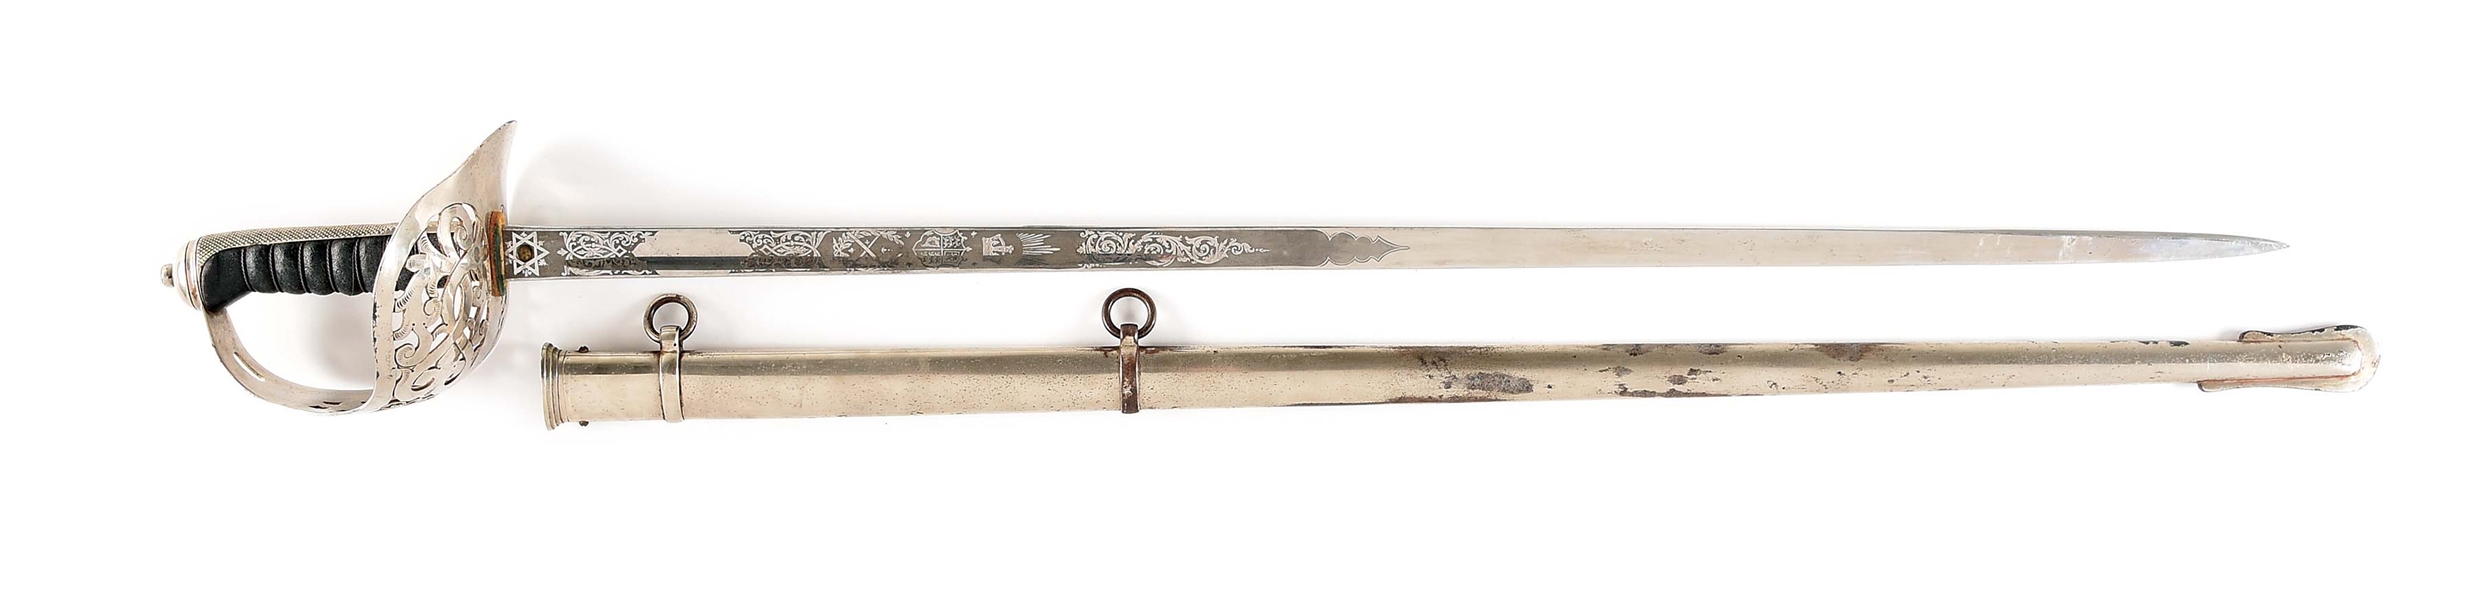 BRITISH PATTERN 1895 OFFICERS SWORD WITH SCABBARD.